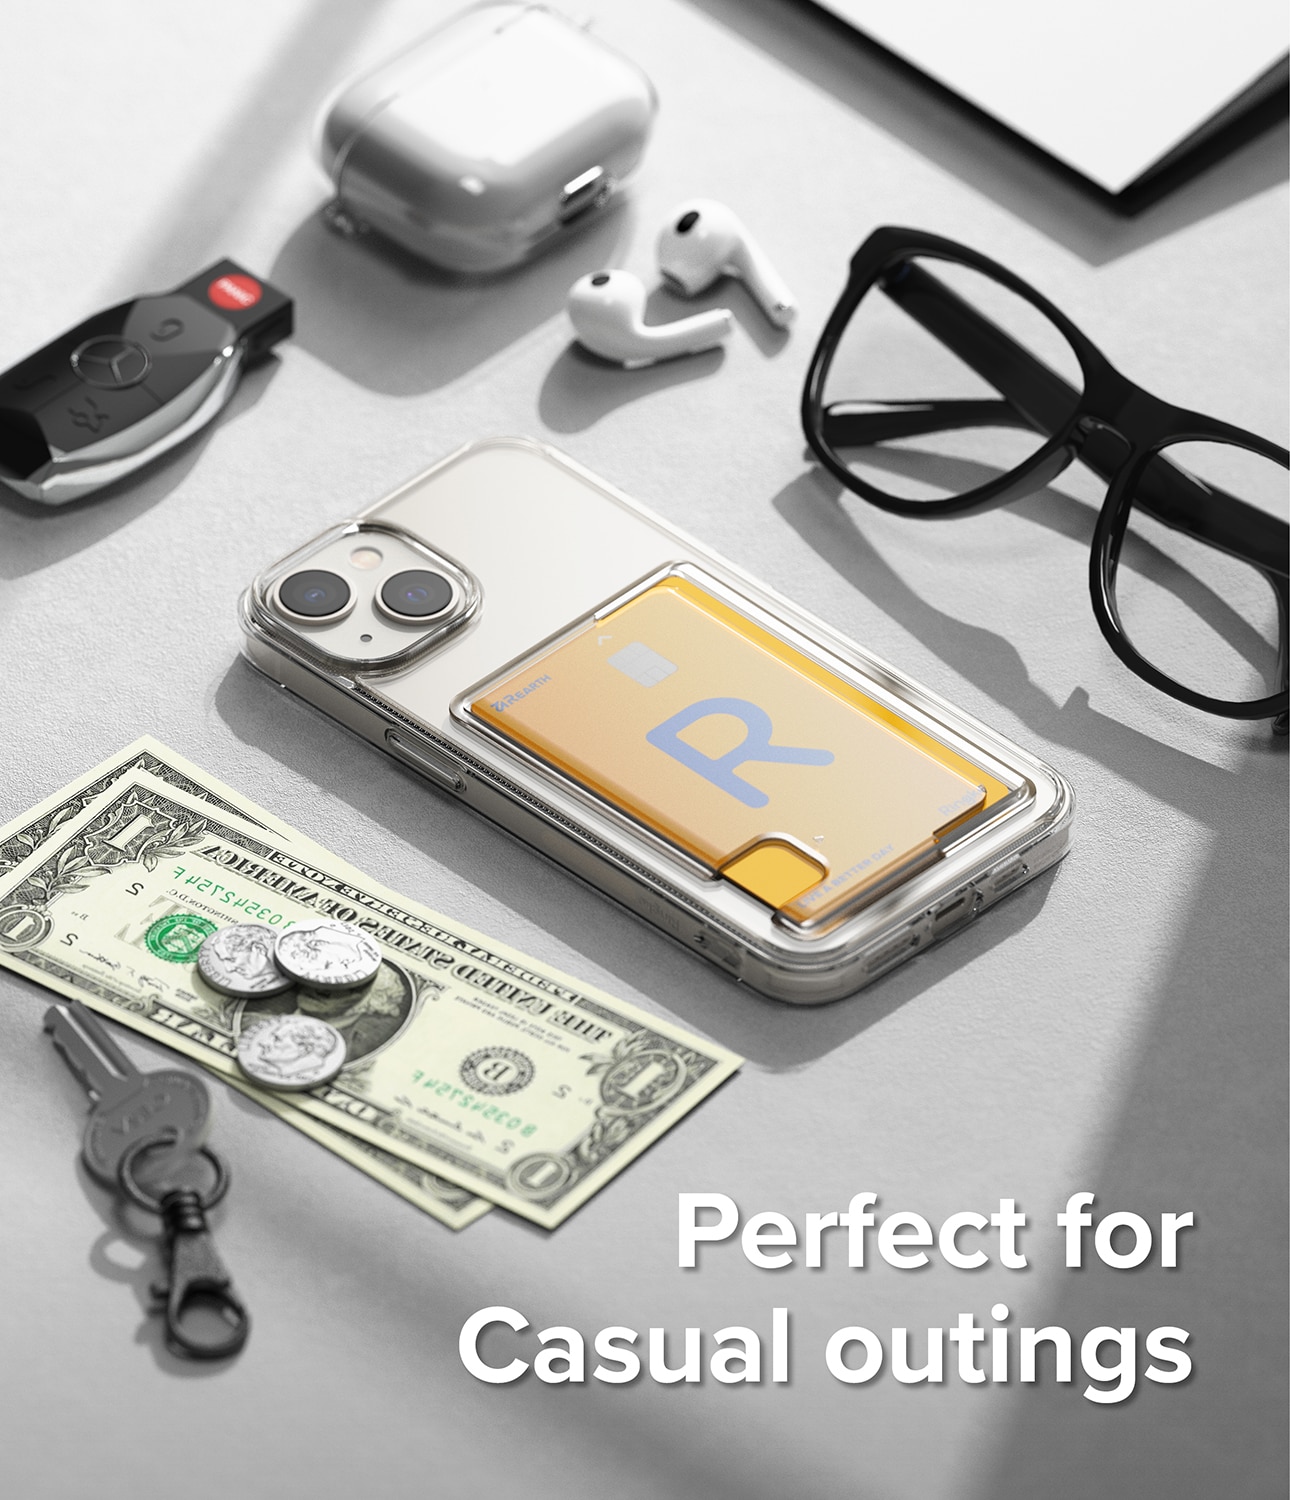 Fusion Card Case iPhone 14 Clear